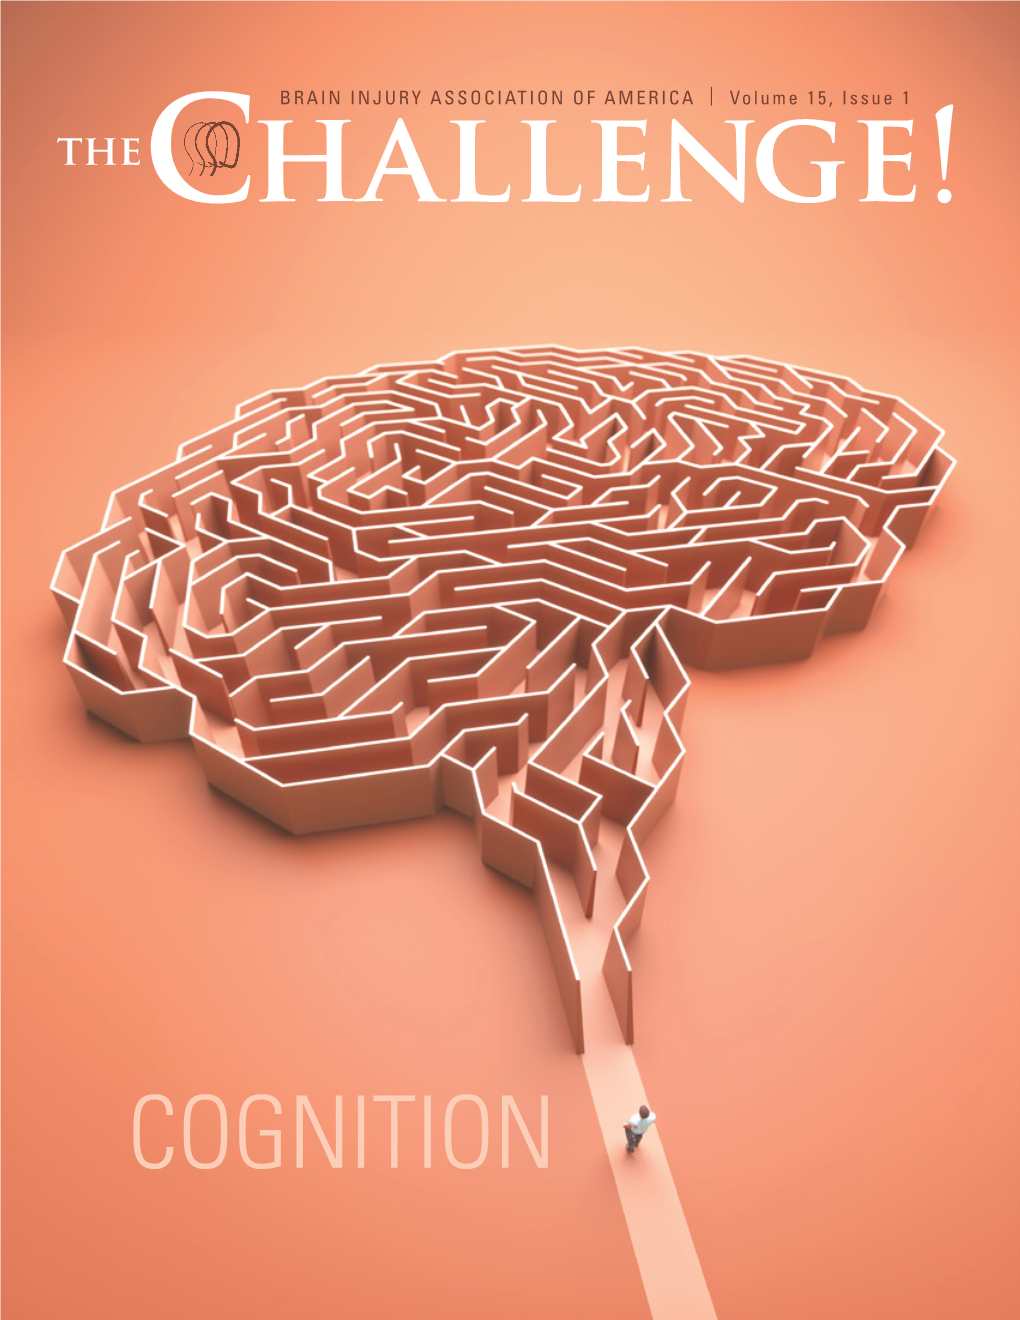 Cognition Table of Contents